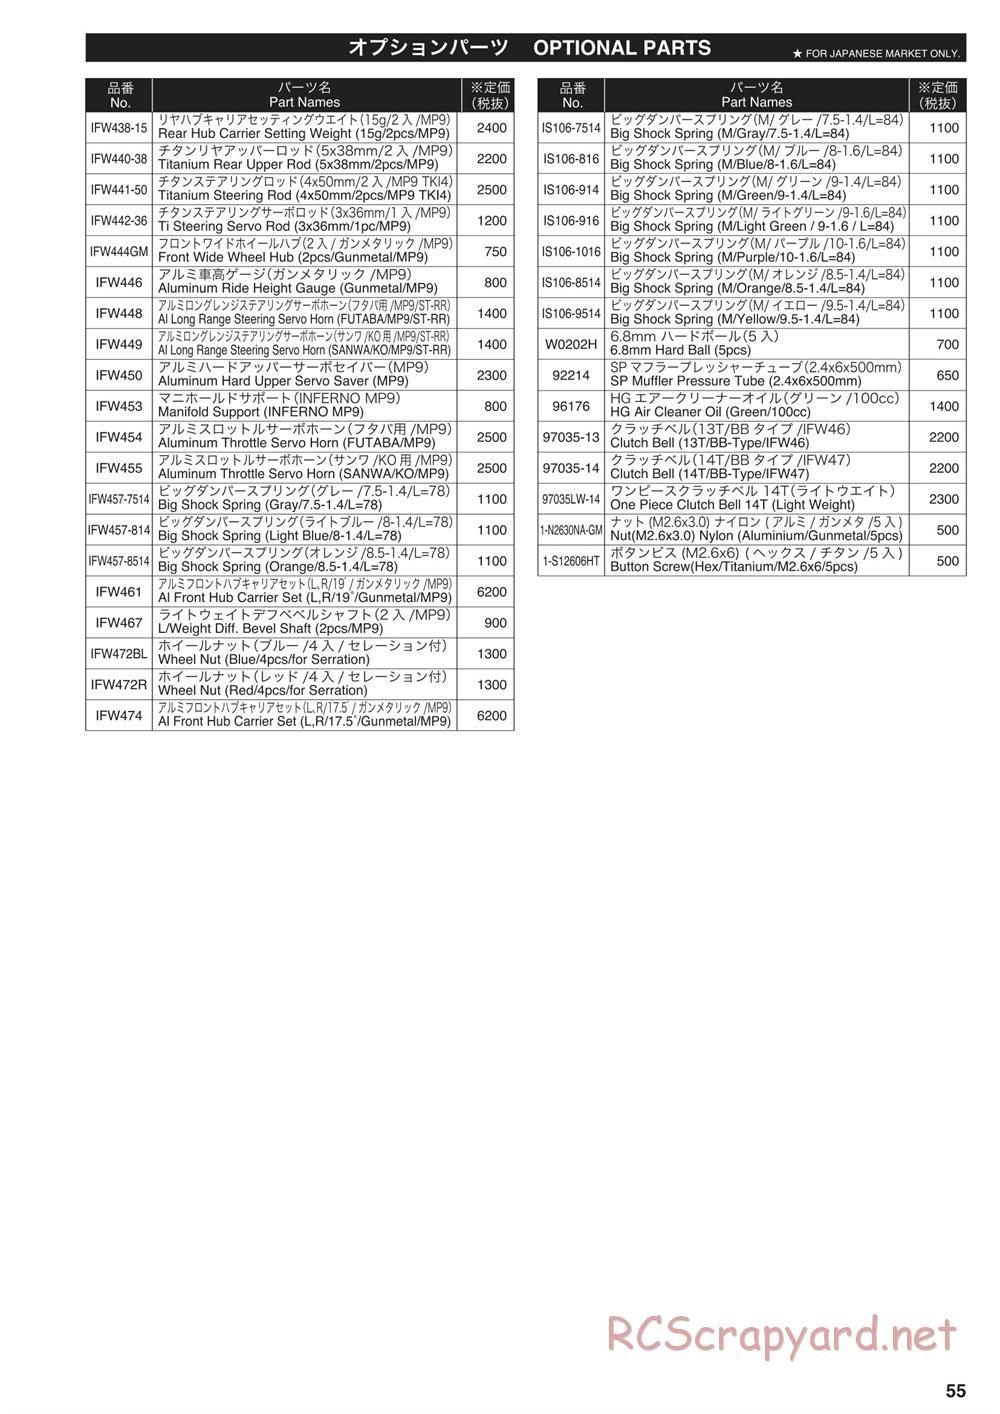 Kyosho - Inferno MP10 - Parts List - Page 4